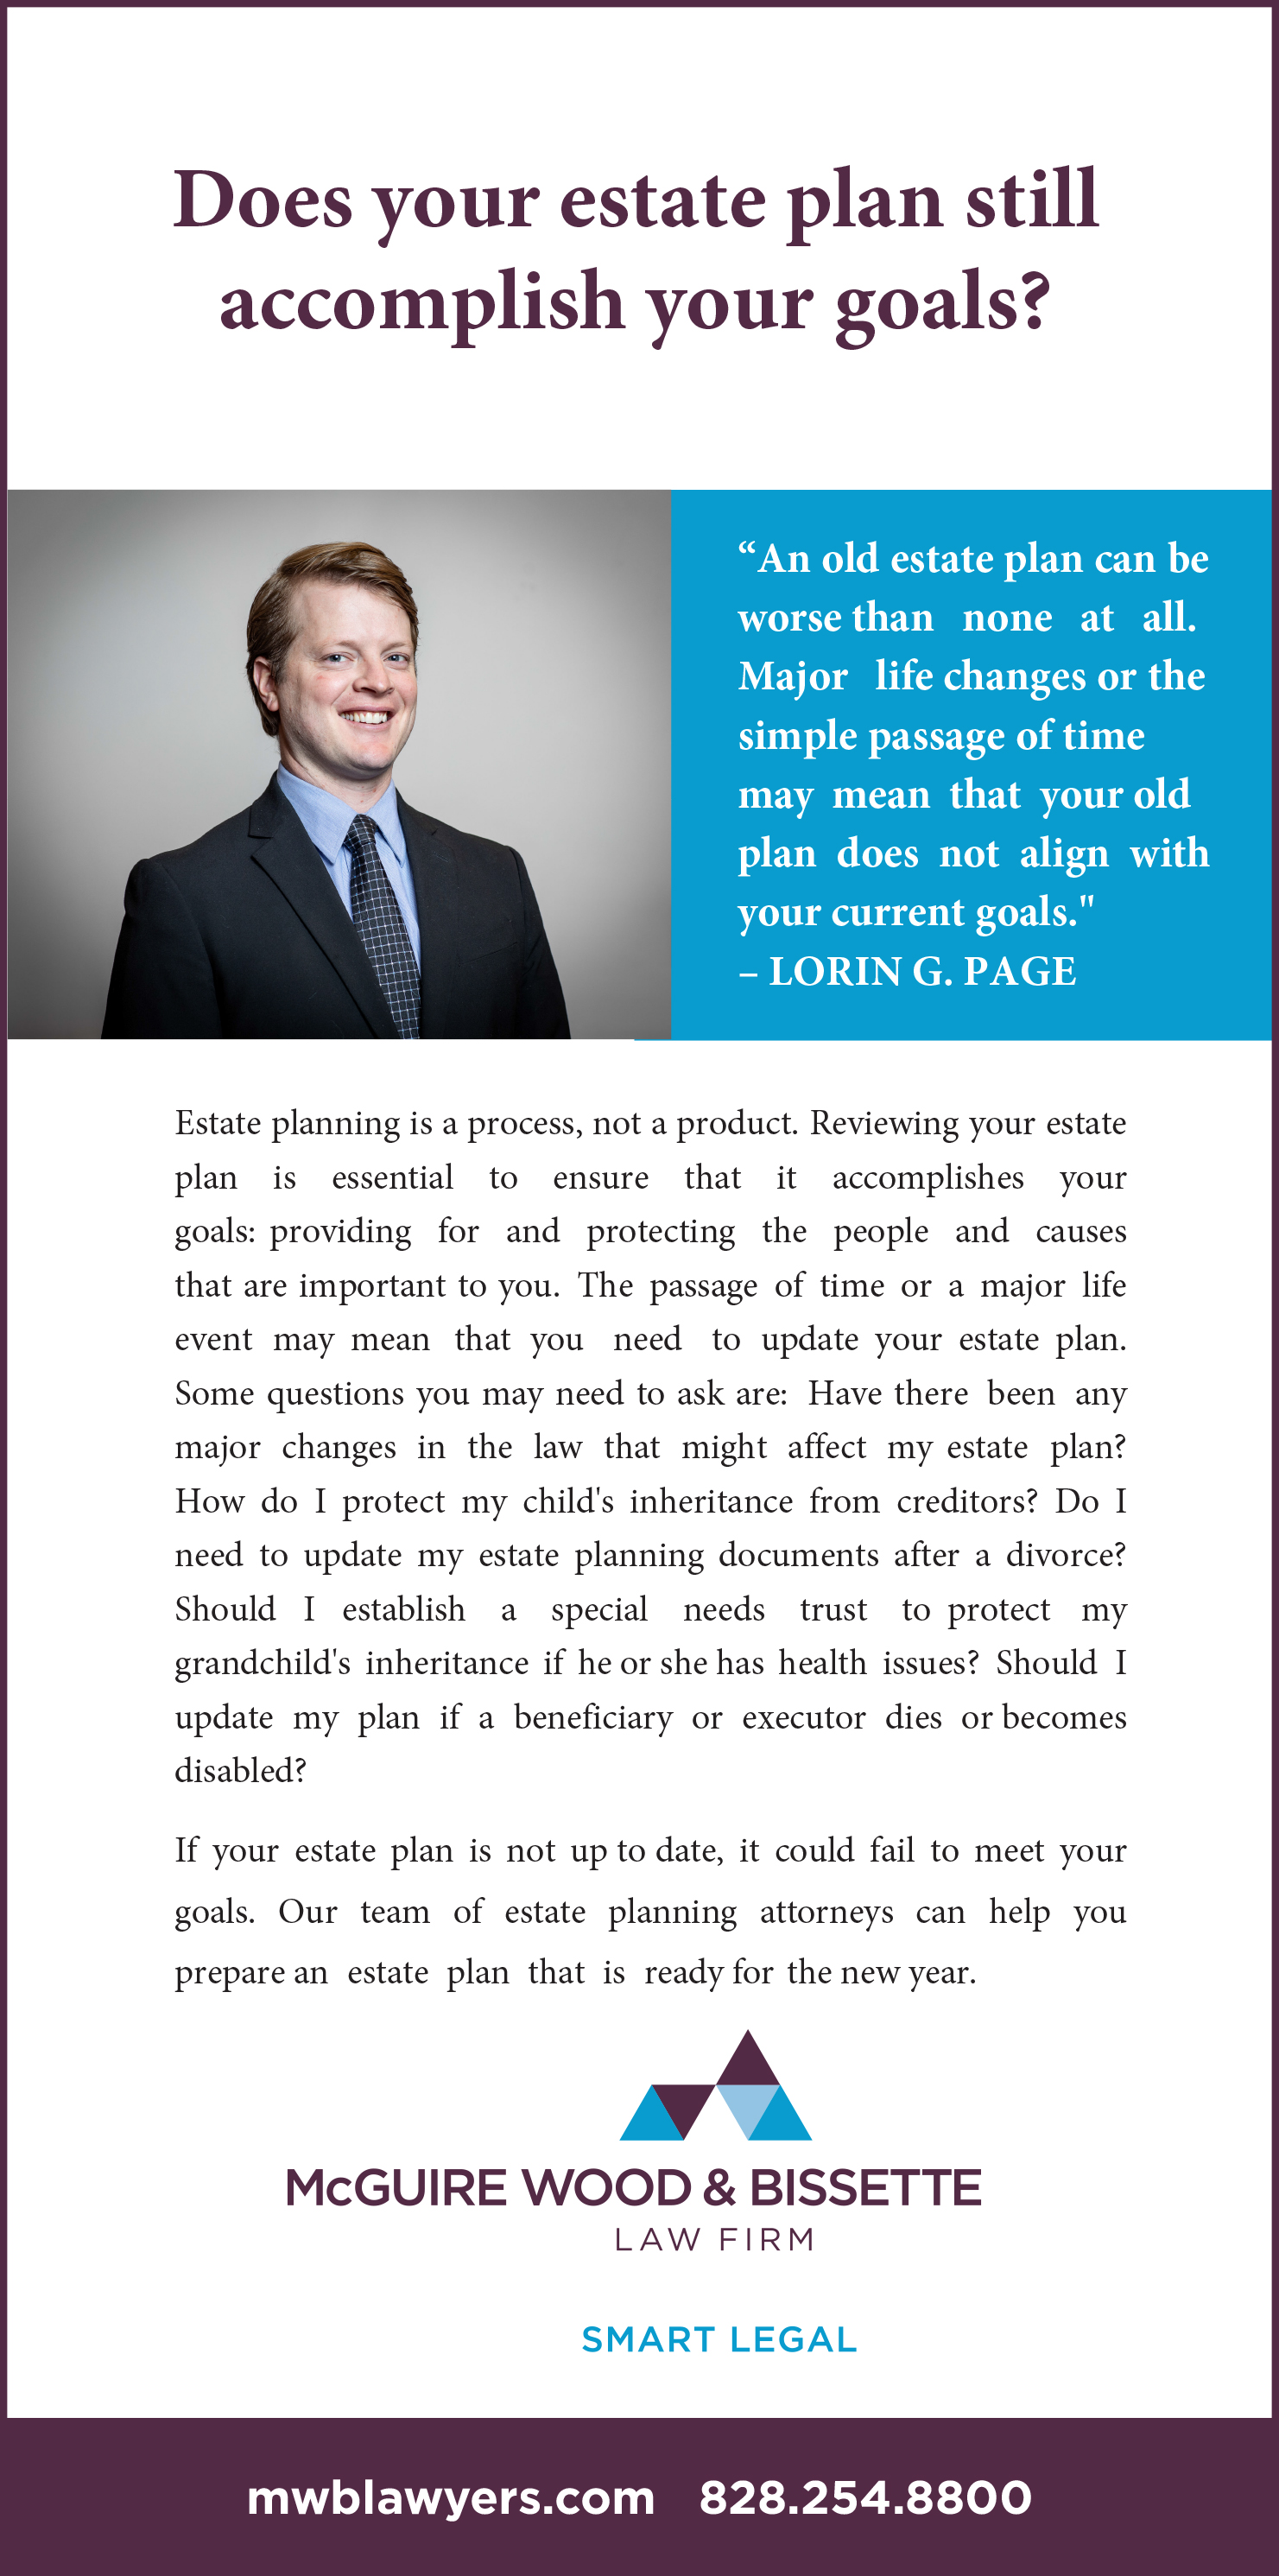 McGuire Wood & Bissette Attorney Lorin Page article "Does your estate plan still accomplish your goals?"